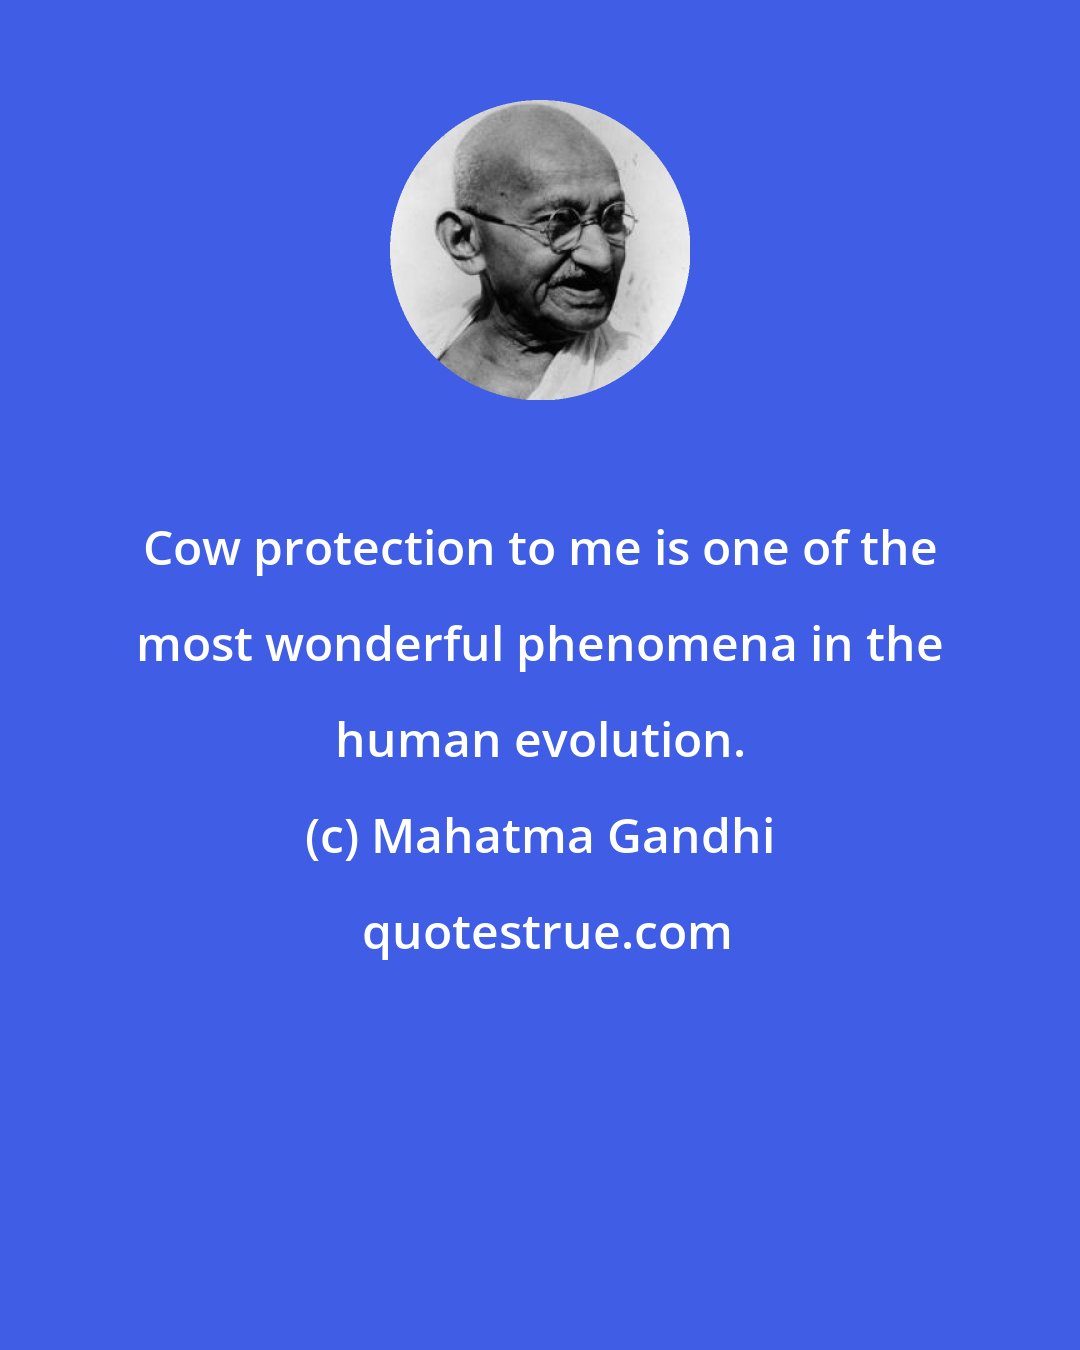 Mahatma Gandhi: Cow protection to me is one of the most wonderful phenomena in the human evolution.